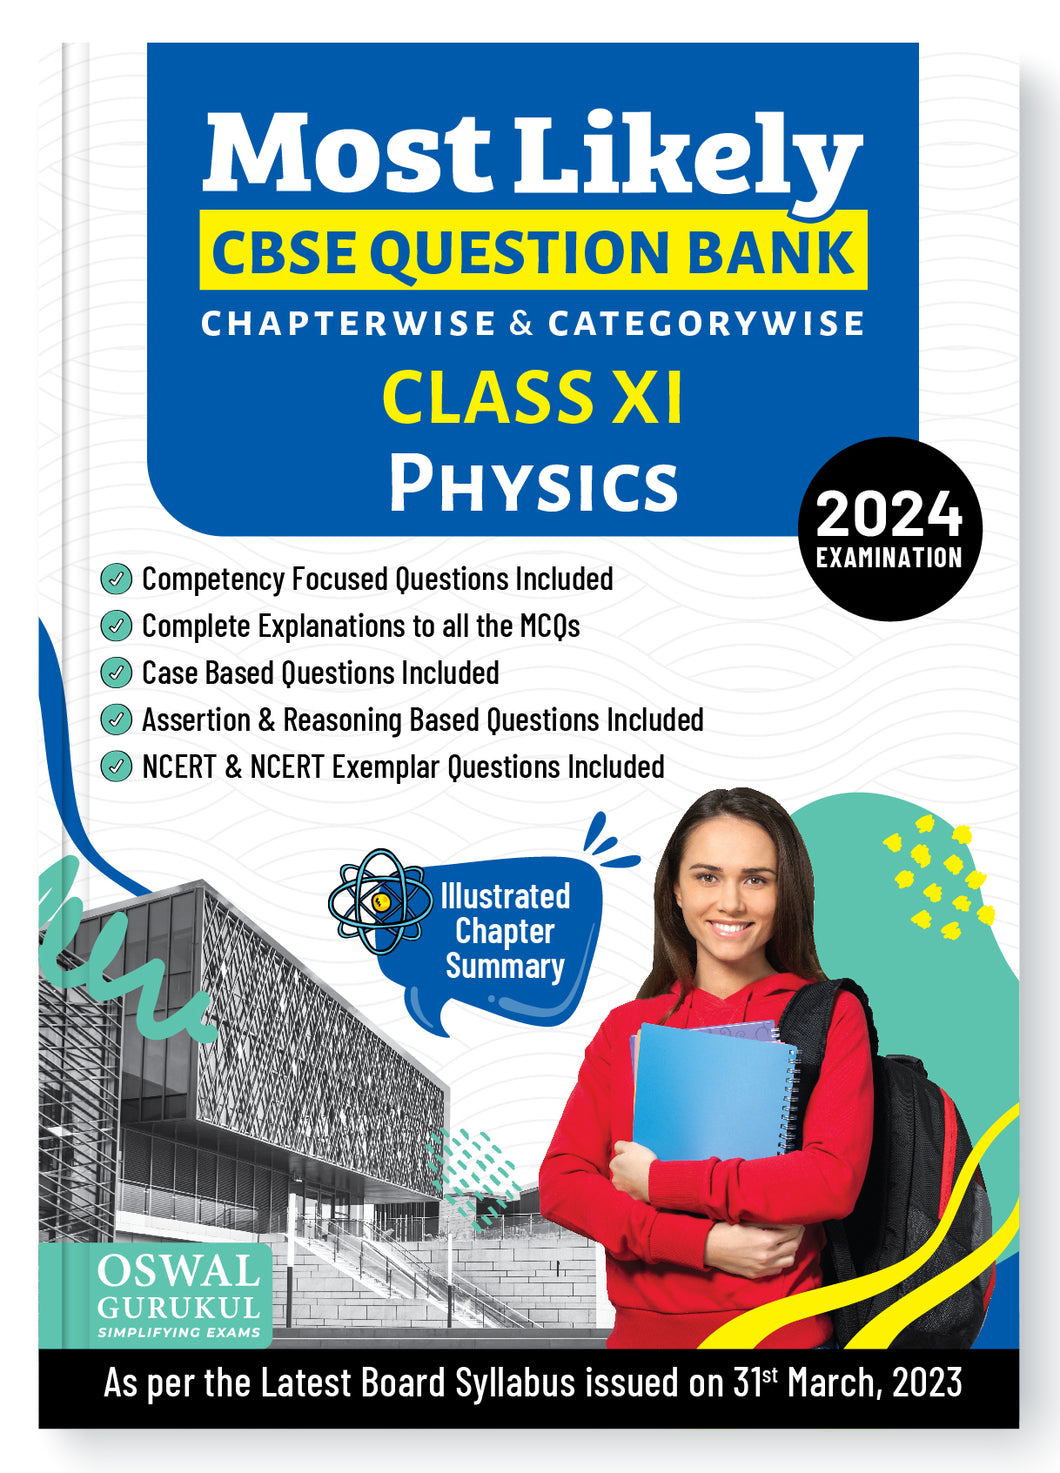 Oswal - Gurukul Physics Most Likely CBSE Question Bank : Class 11 Exam 2024